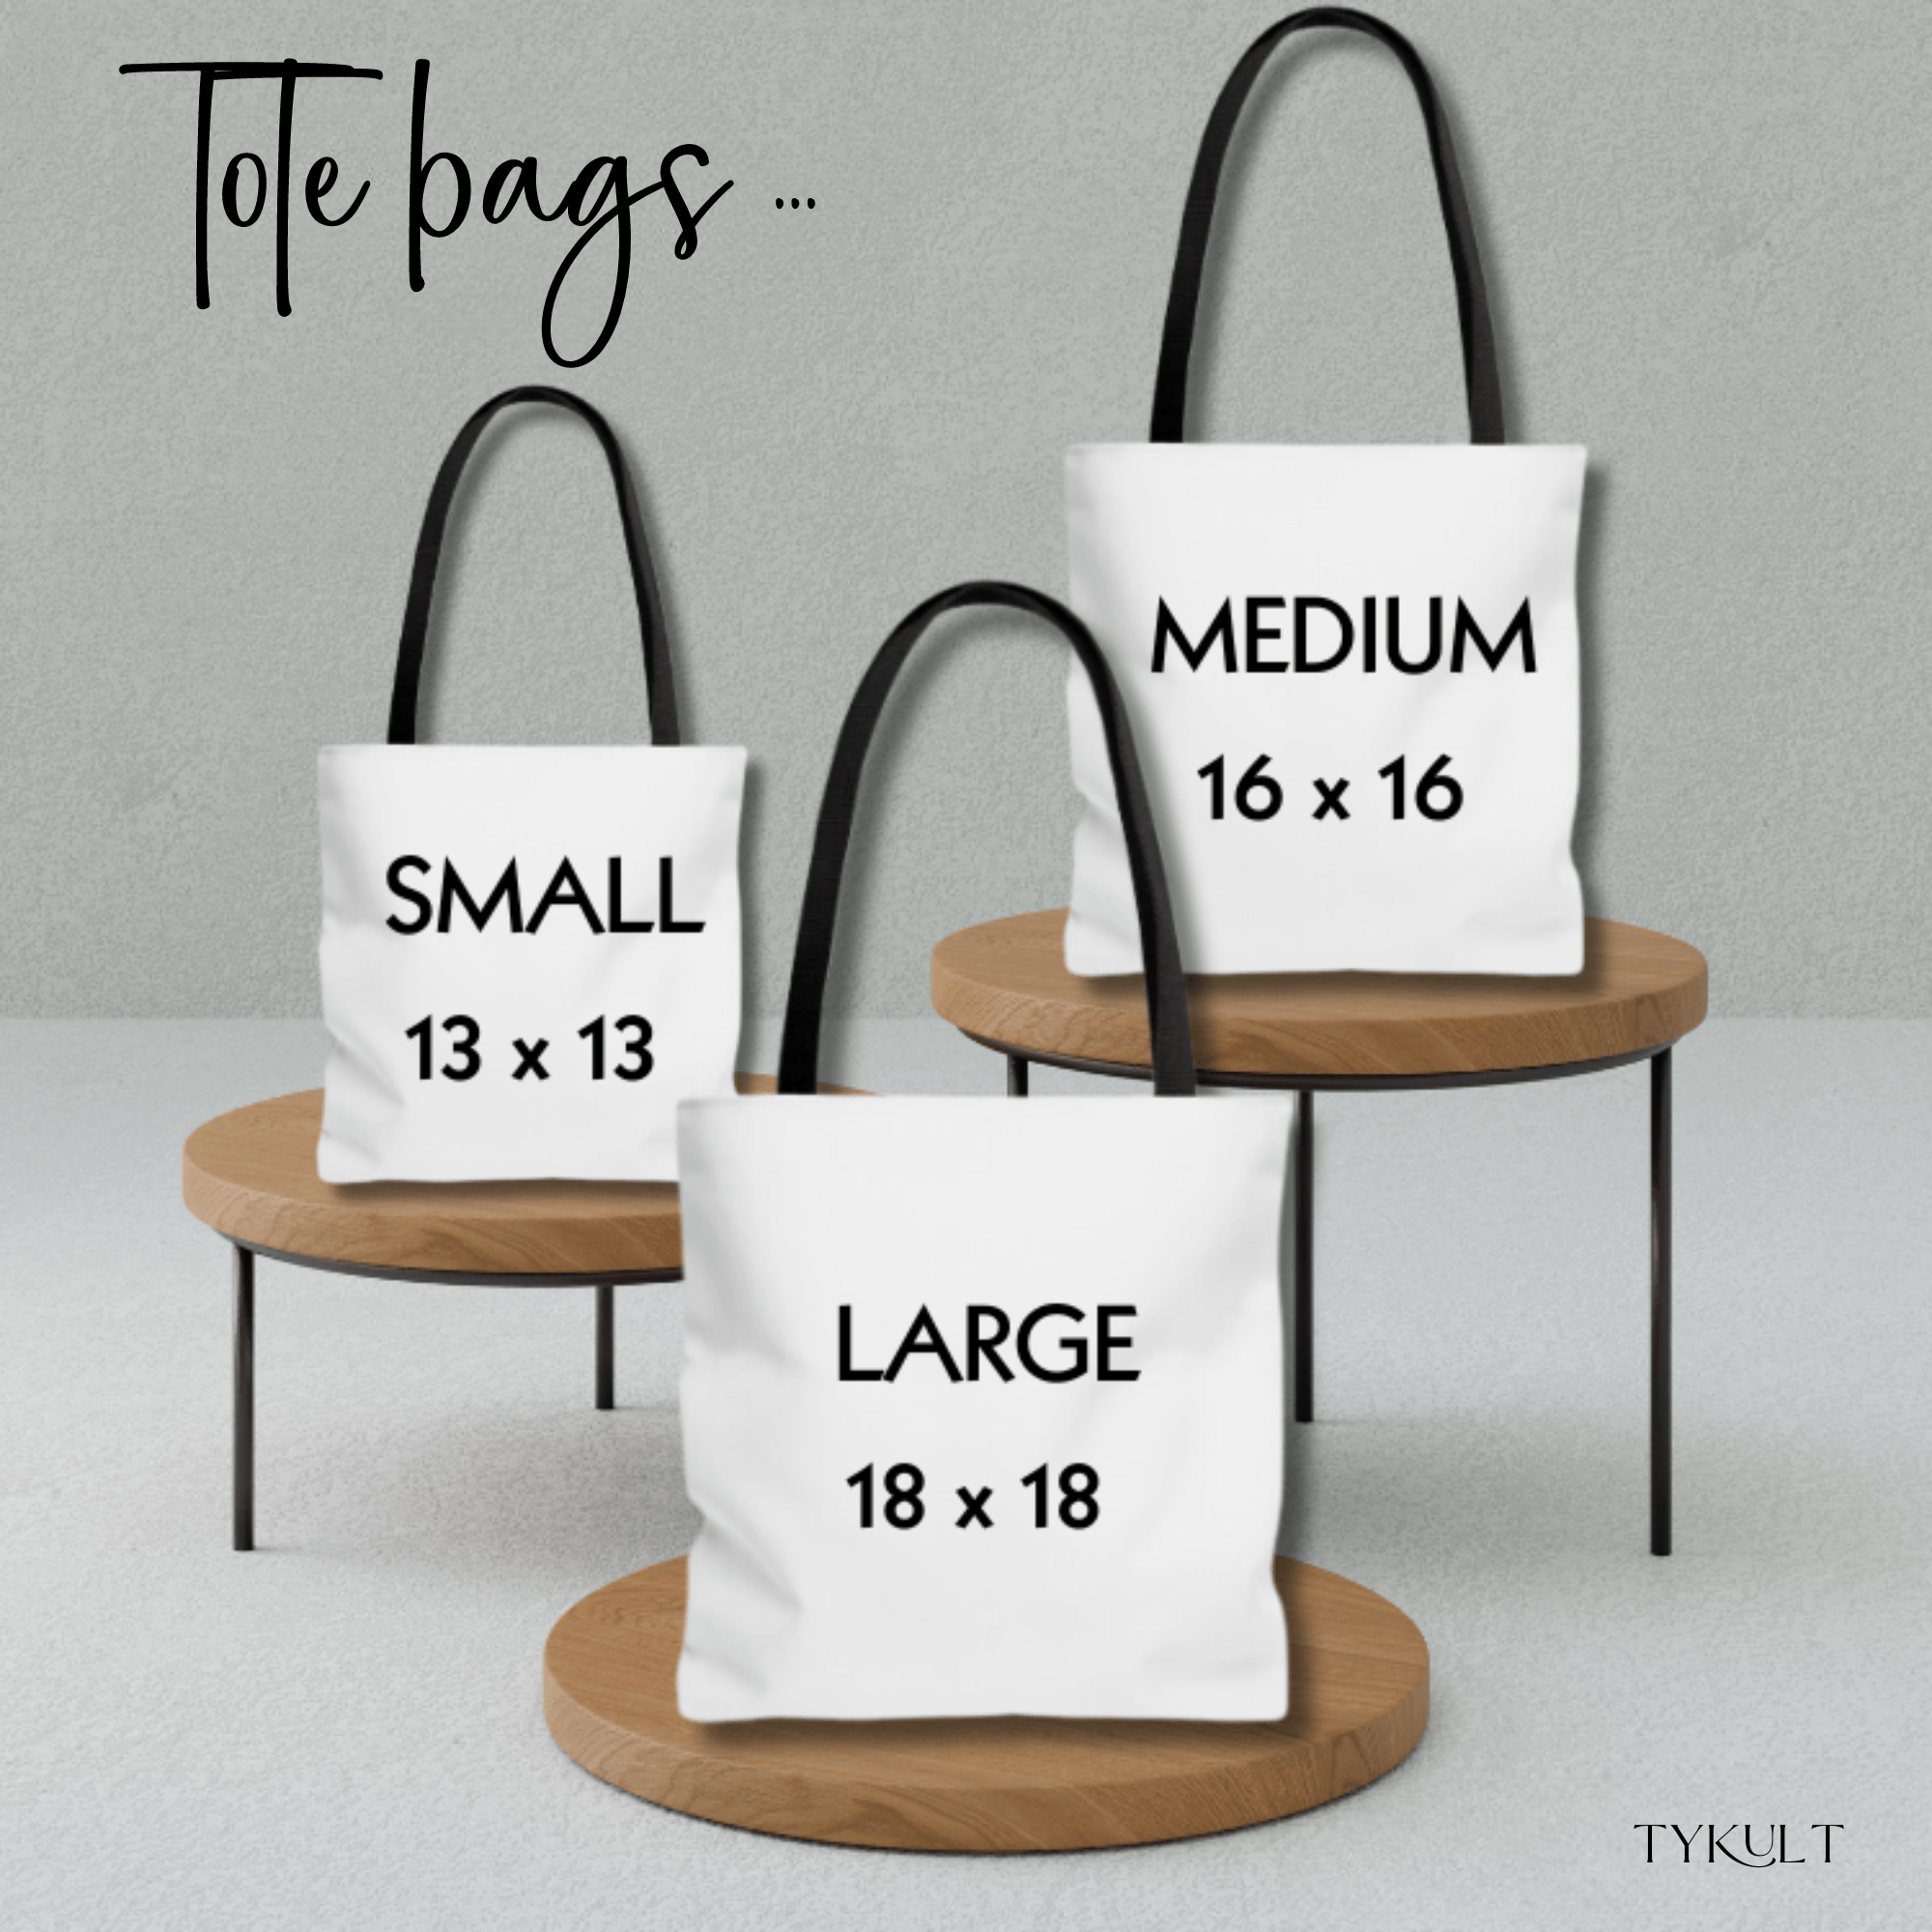 PERSONALIZABLE TOTE BAG | MONOGRAM - Z | PERFECT GIFT for BFF, MOTHER-in-LAW, MOM